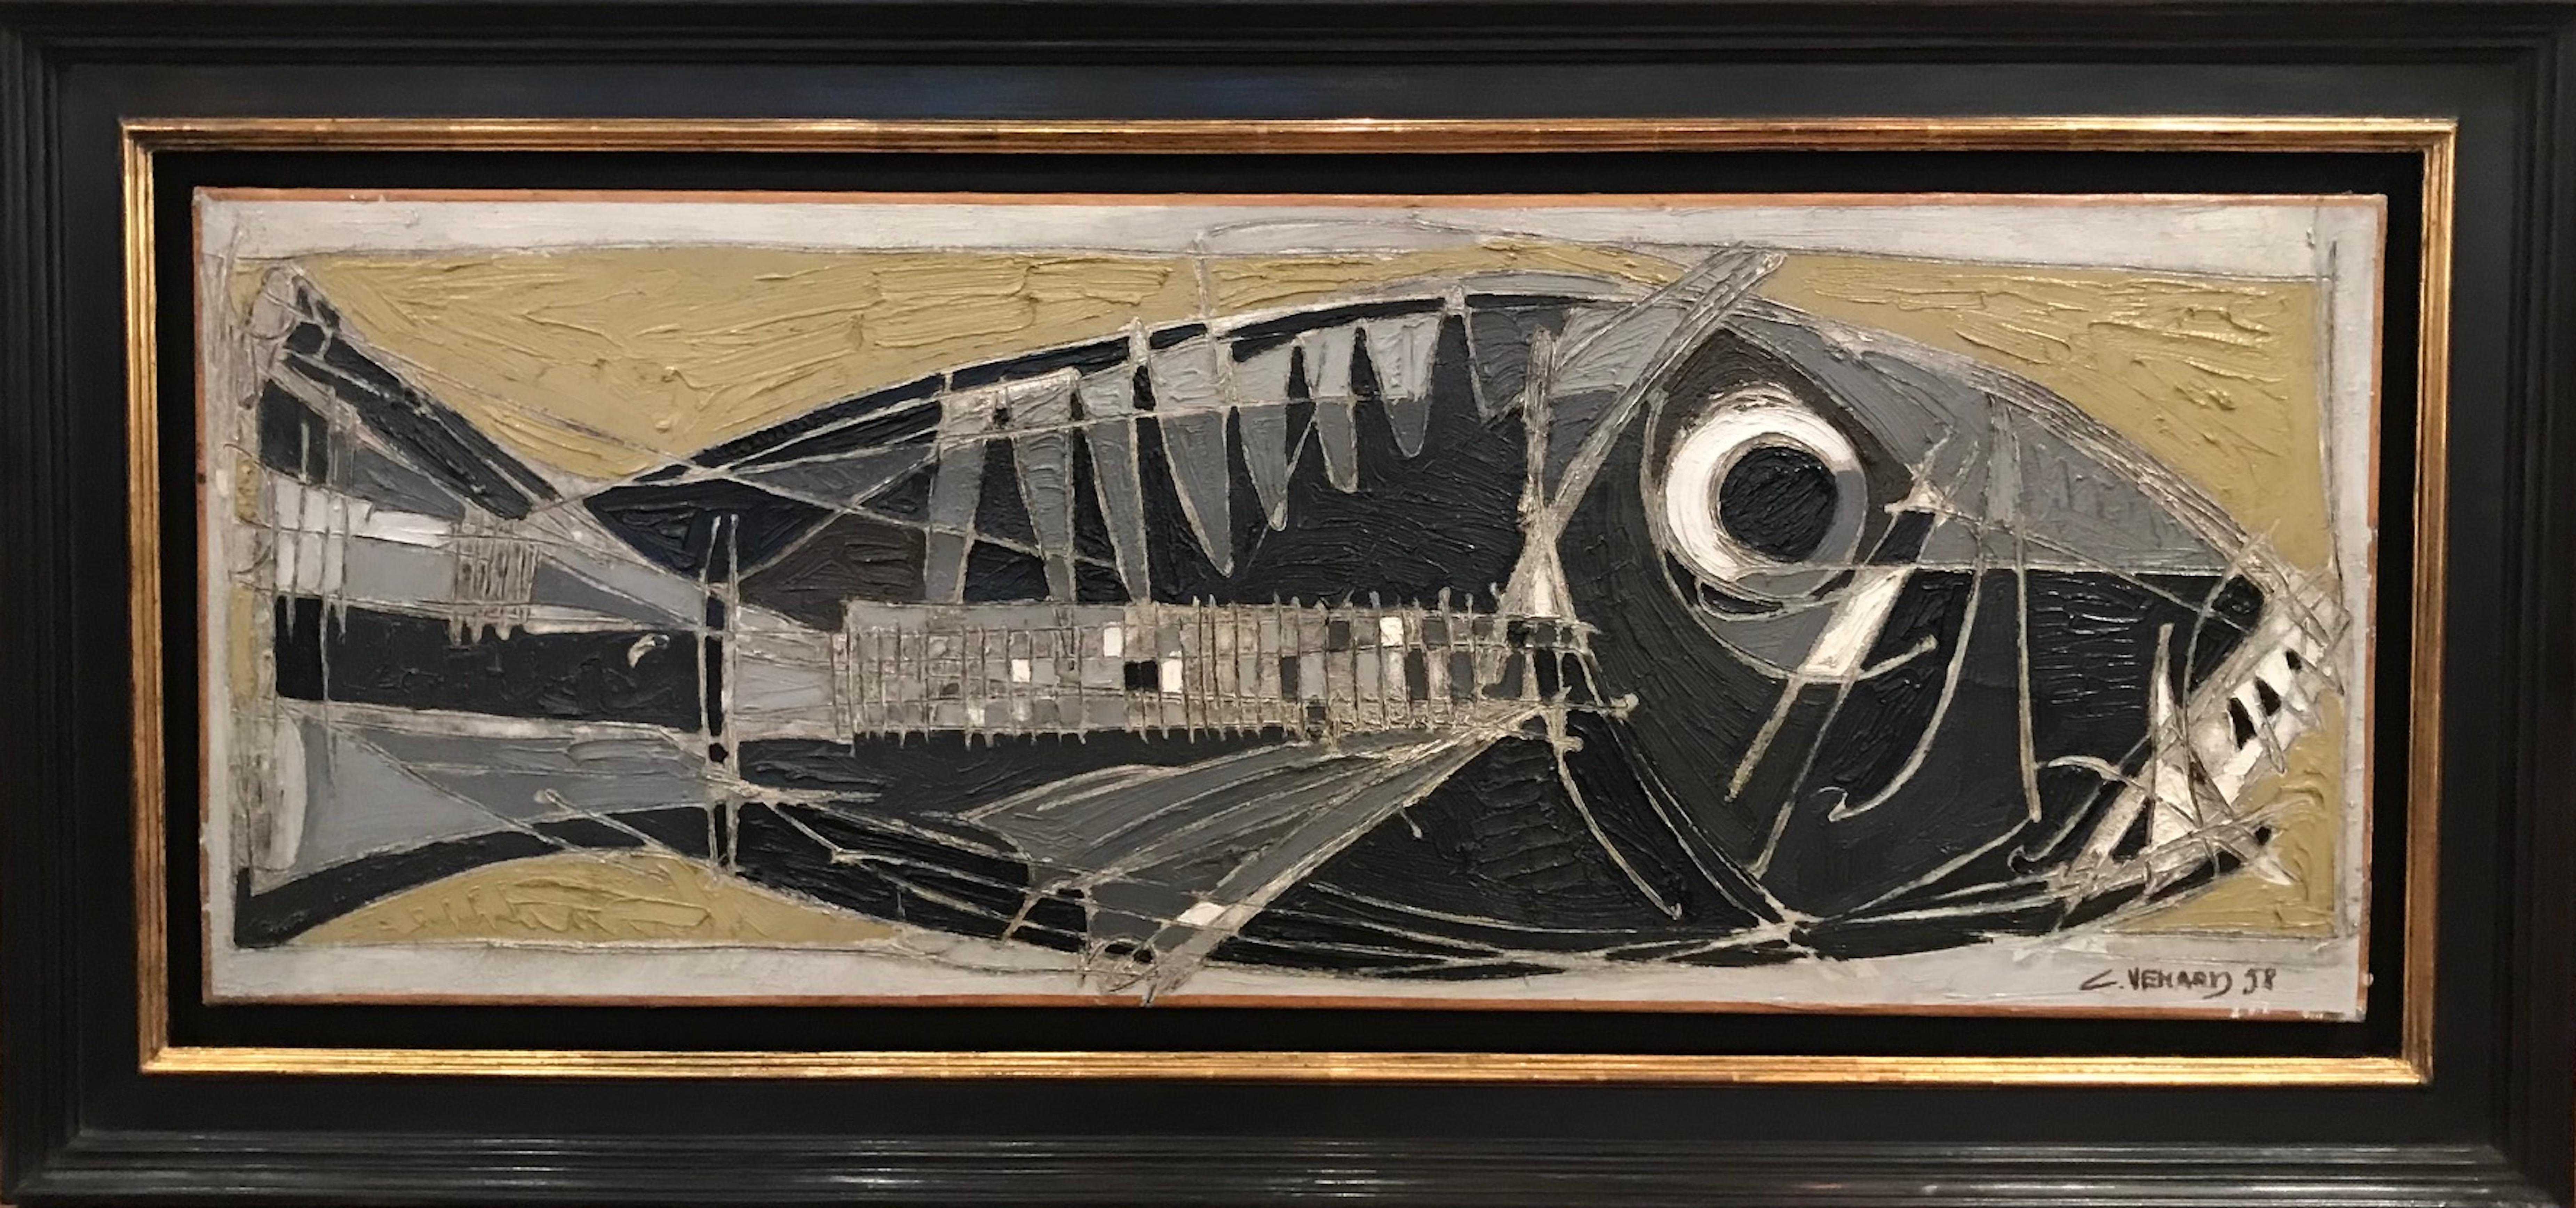 Post Cubist Abstract Painting of a Fish 'le Dorade' by Claude Venard 